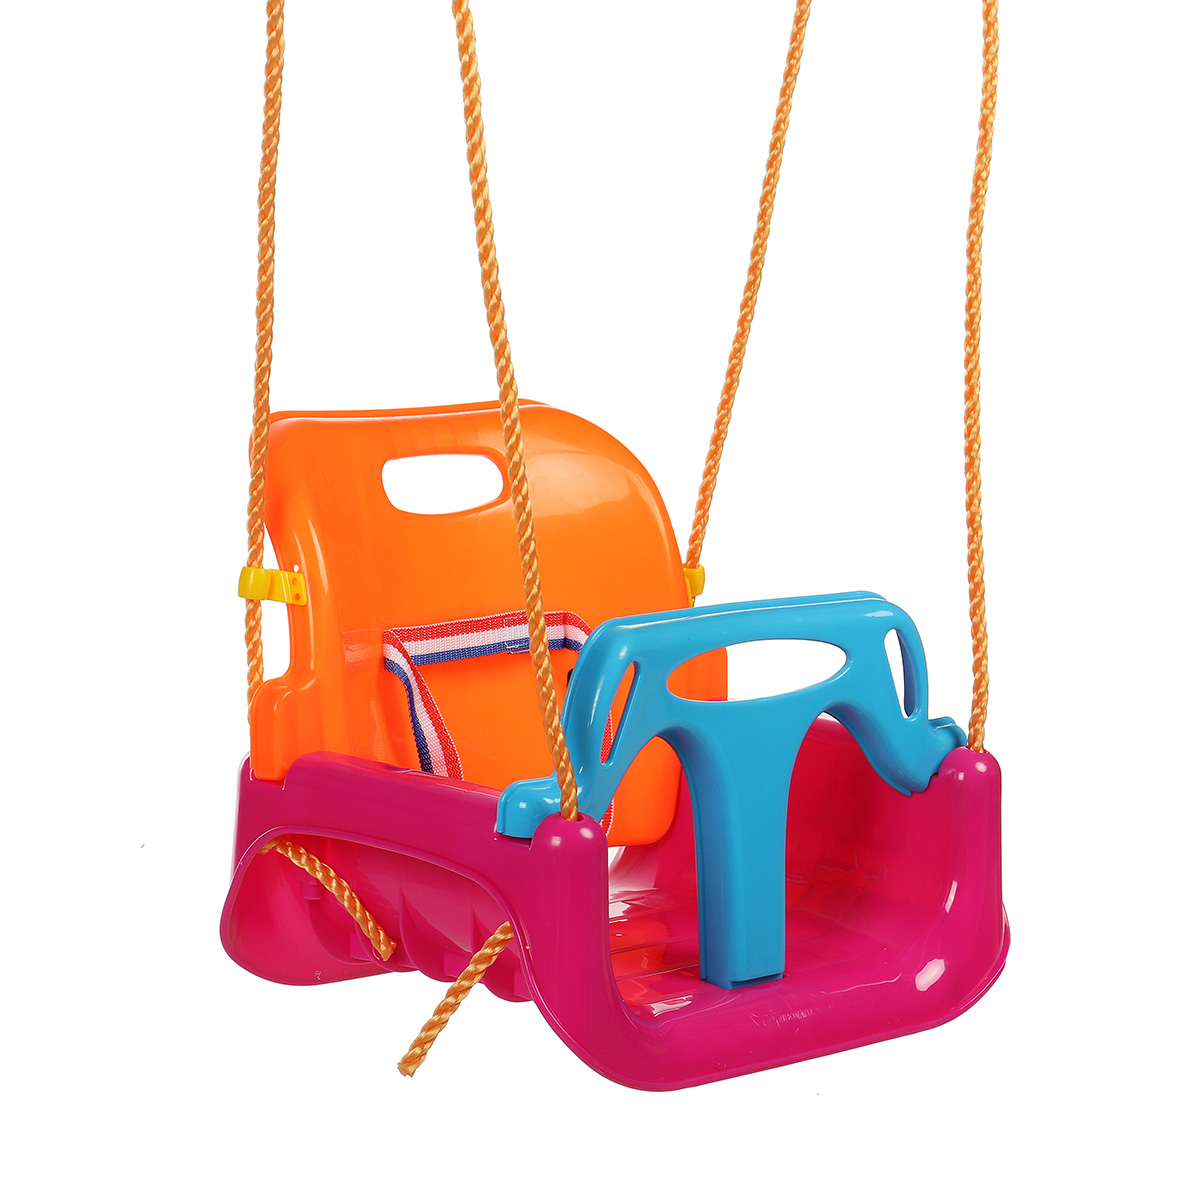 3-in-1 Swing Toys Anti-skid Hanging Chair Baby Safety Swing Seat Outdoor Garden for More Than 6 Months